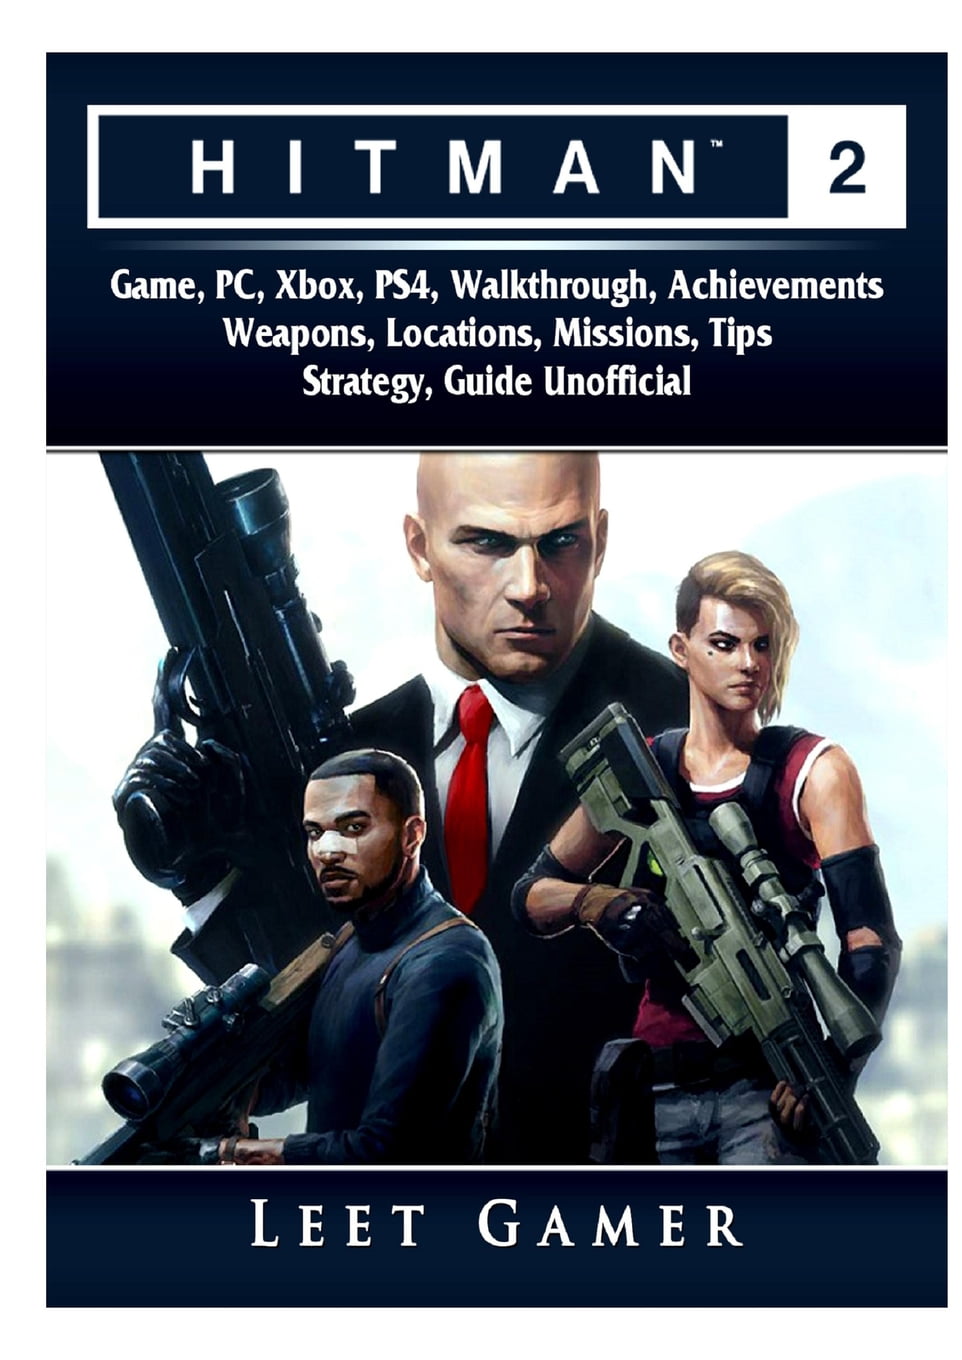 Masaccio lige ud Ikke moderigtigt Hitman 2 Game, Pc, Xbox, Ps4, Walkthrough, Achievements, Weapons,  Locations, Missions, Tips, Strategy, Guide Unofficial (Paperback) -  Walmart.com